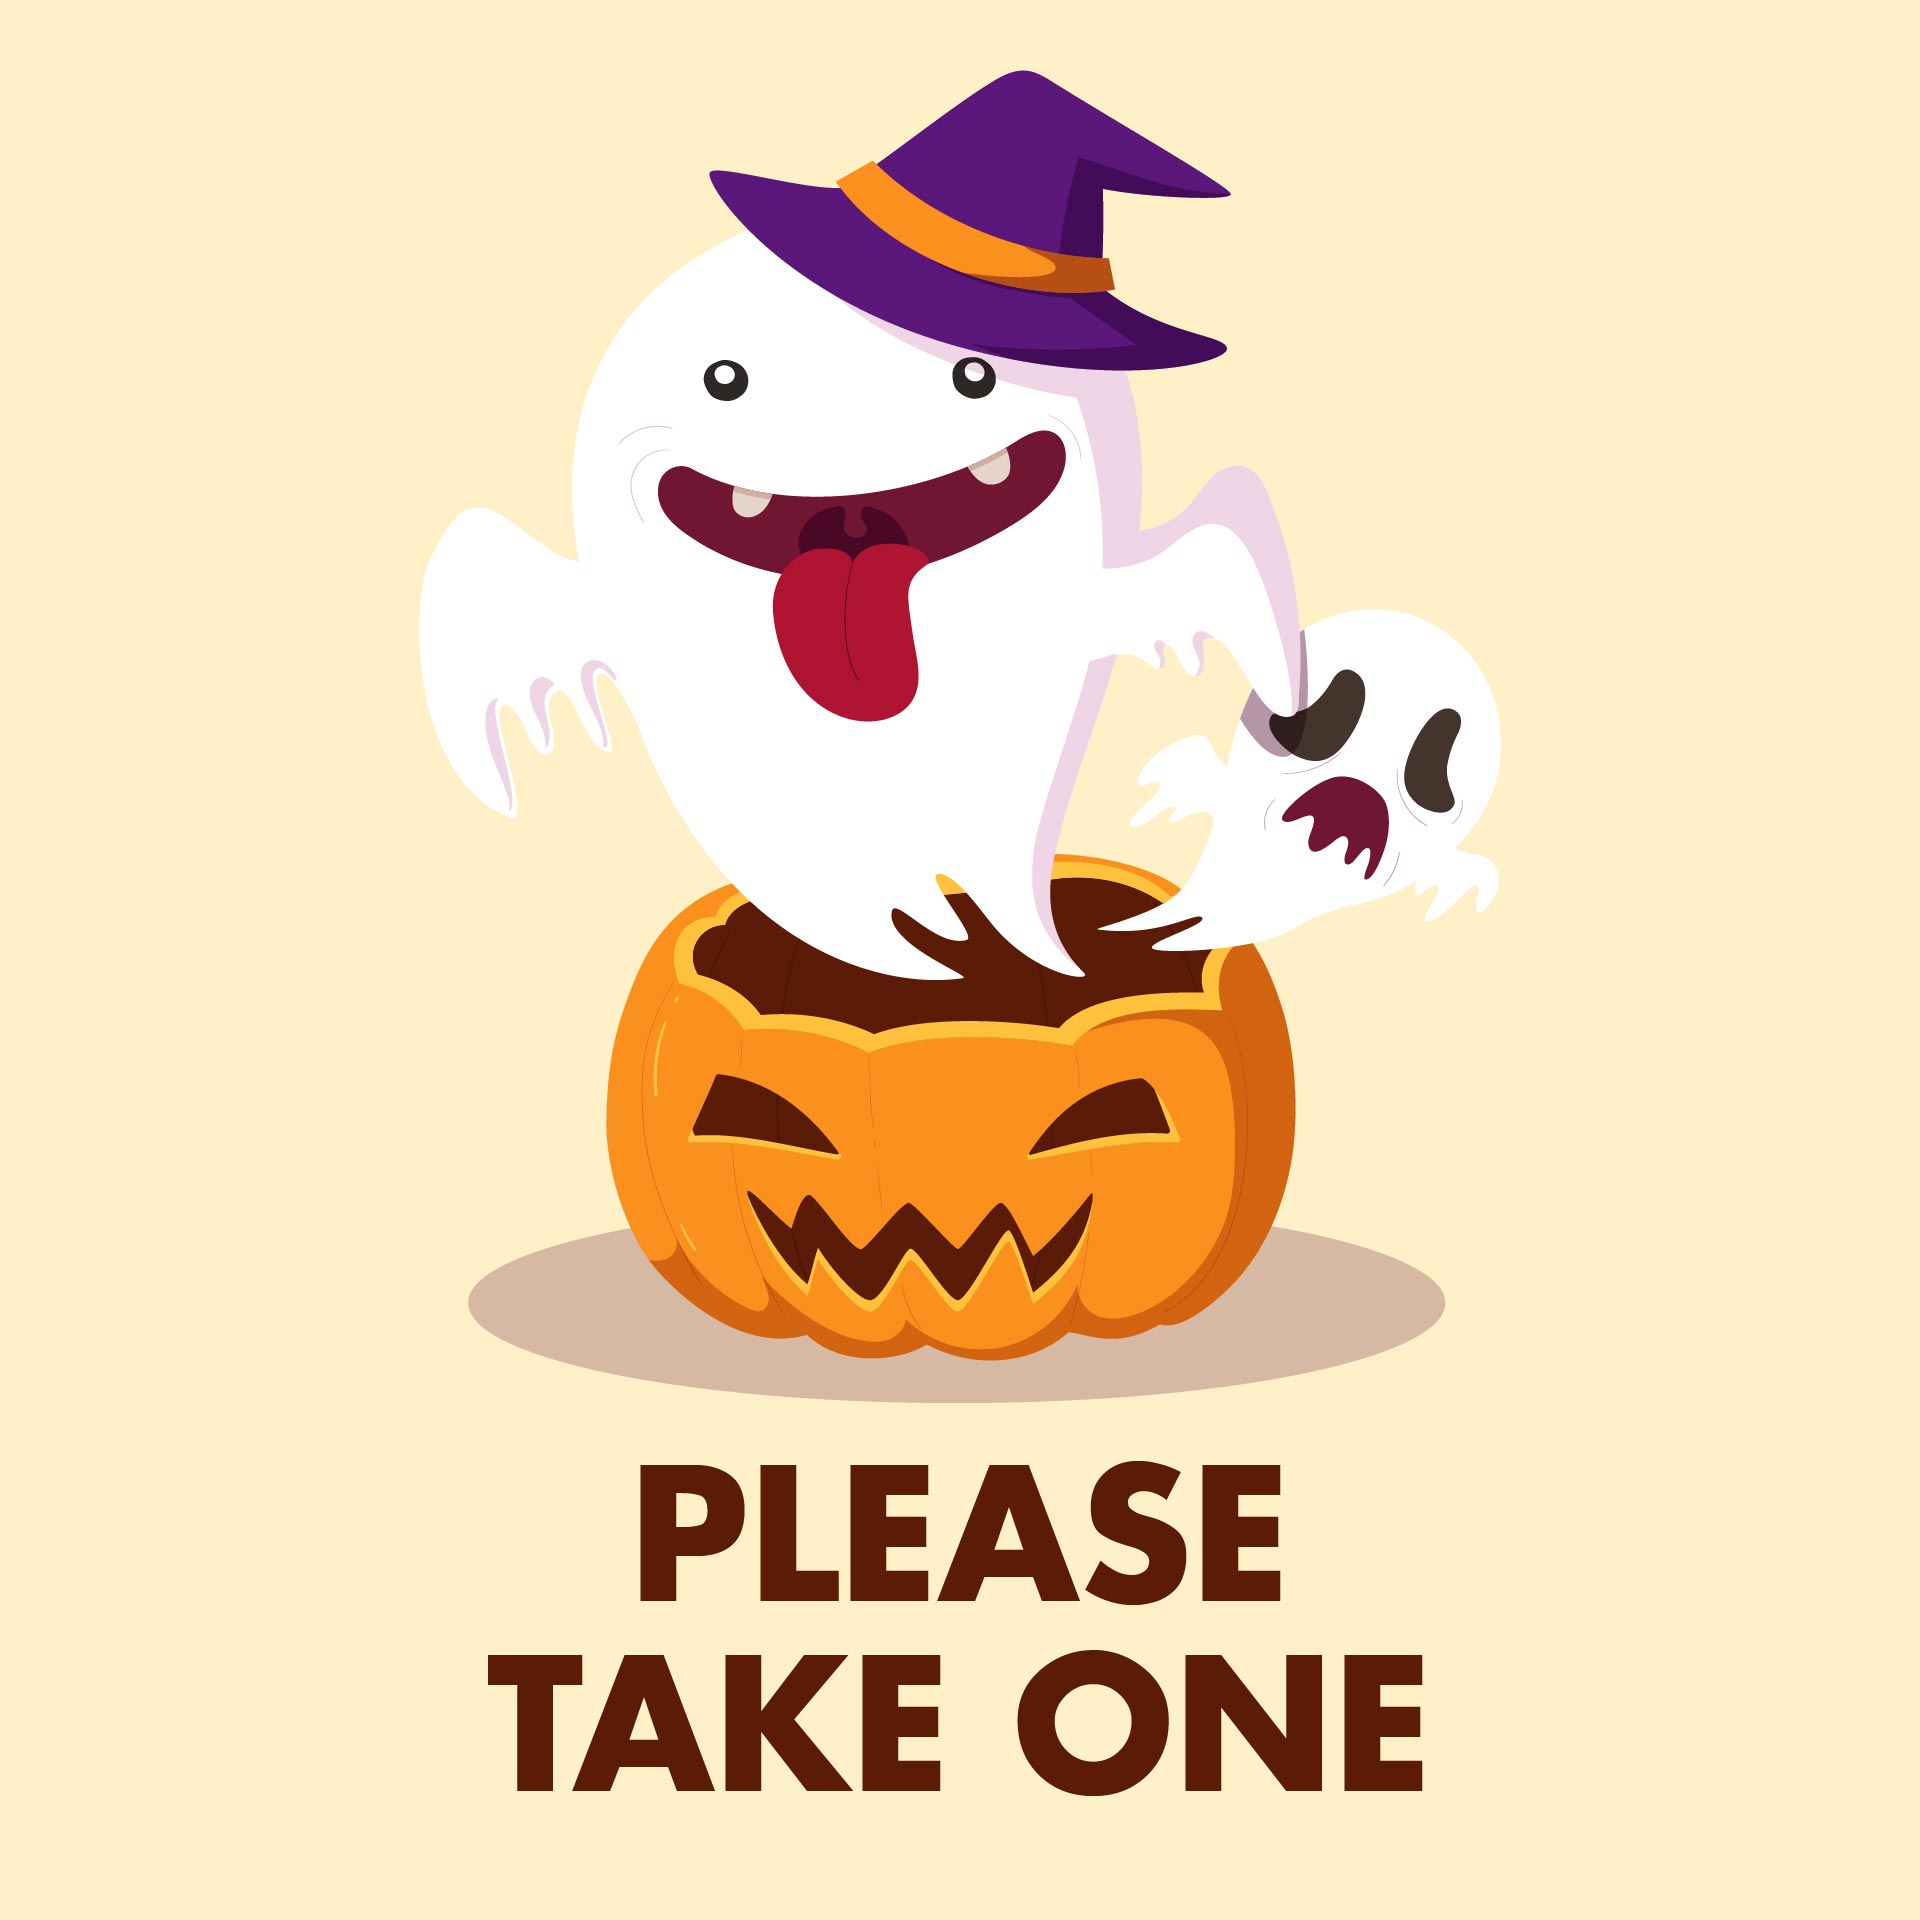 5-best-images-of-halloween-signs-printable-take-2-please-free-printable-halloween-please-take